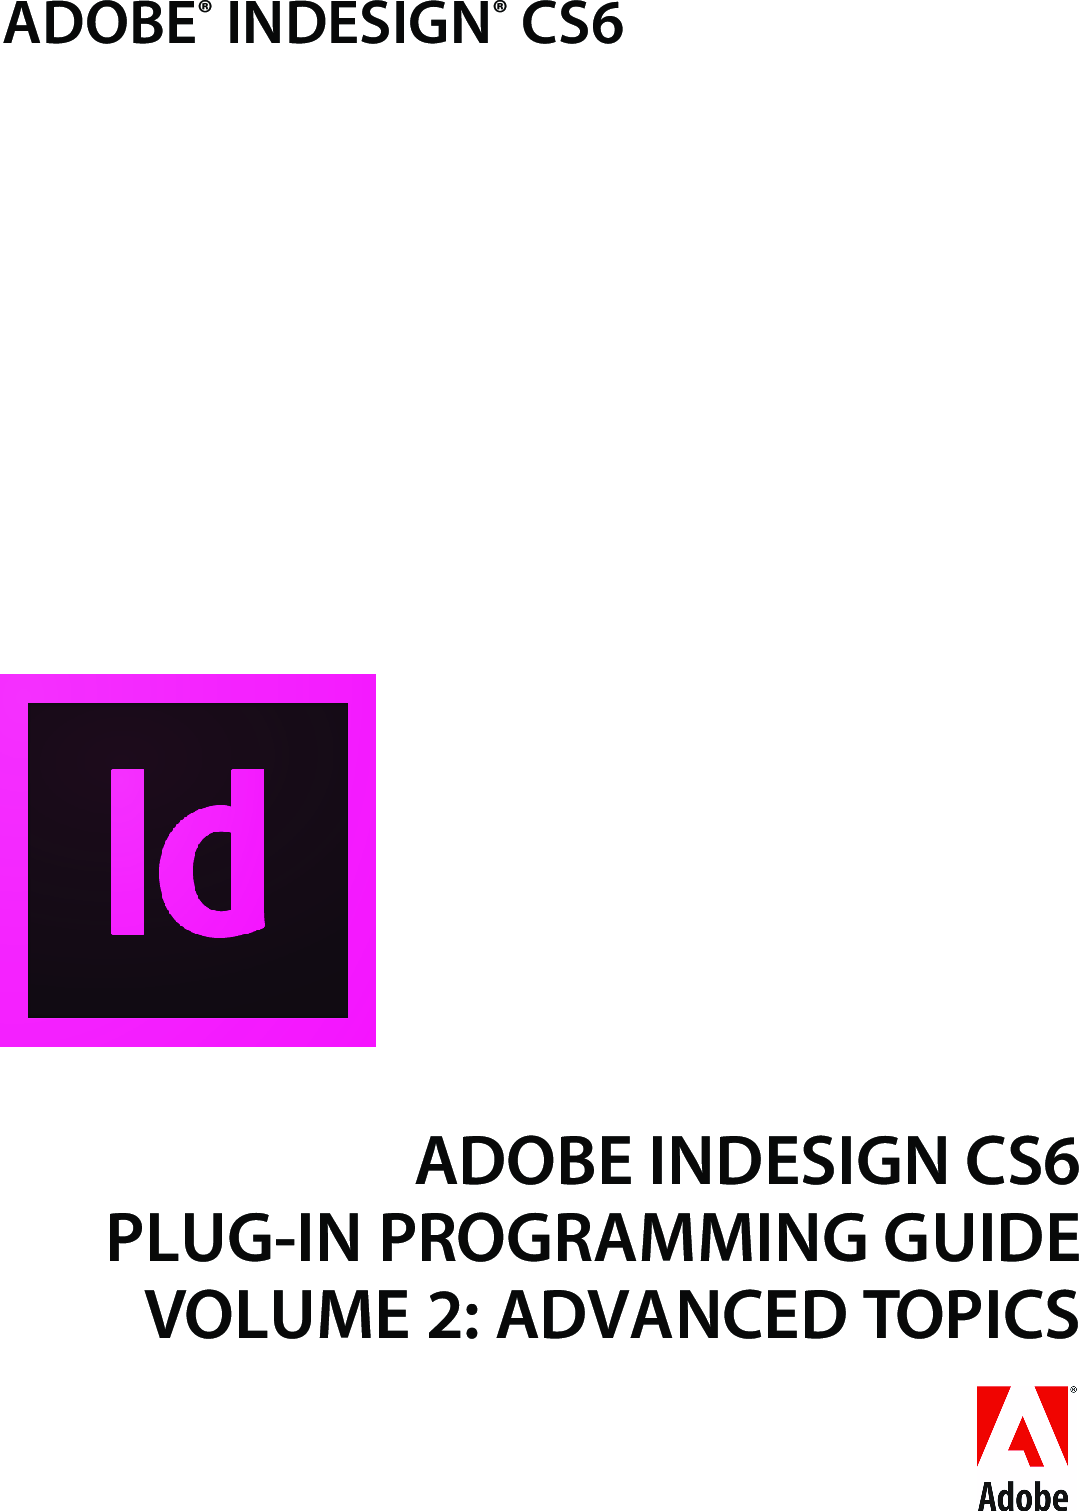 Adobe indesign cs6 free download full version - amelapenny